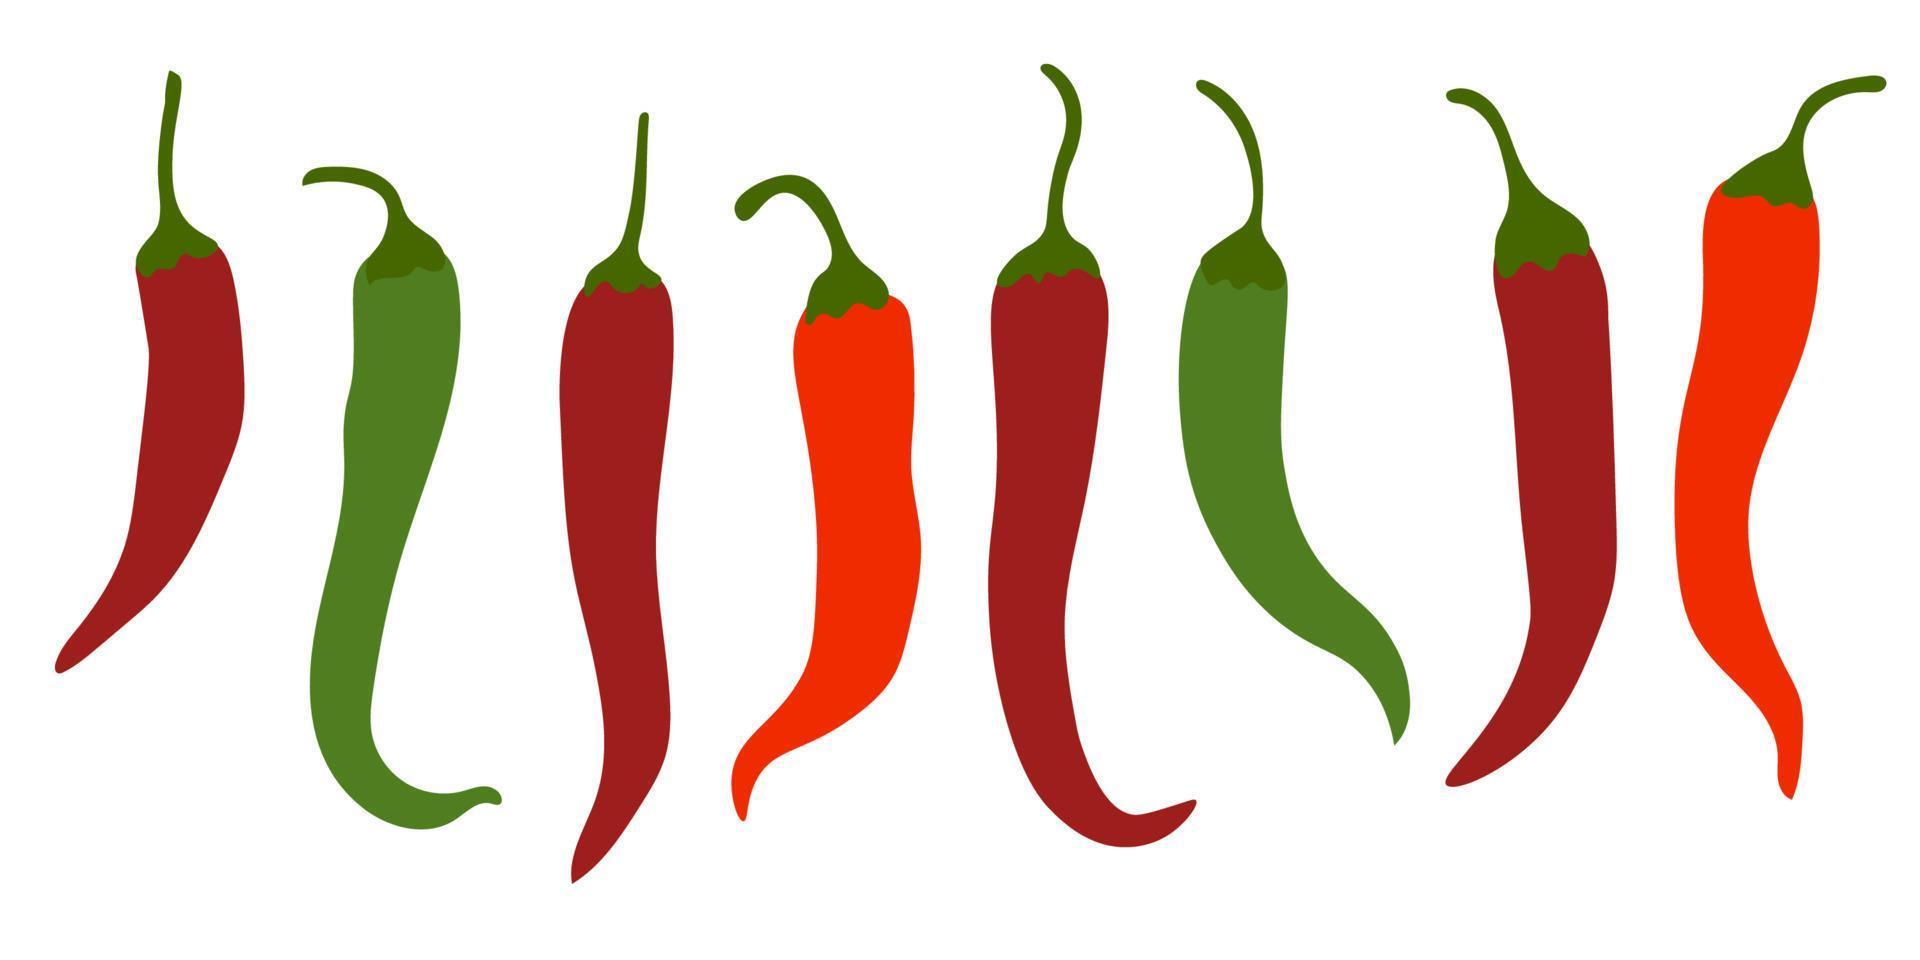 Spicy chili peppers, red, green flat icons, vegetables for hot dishes isolated on white background. vector